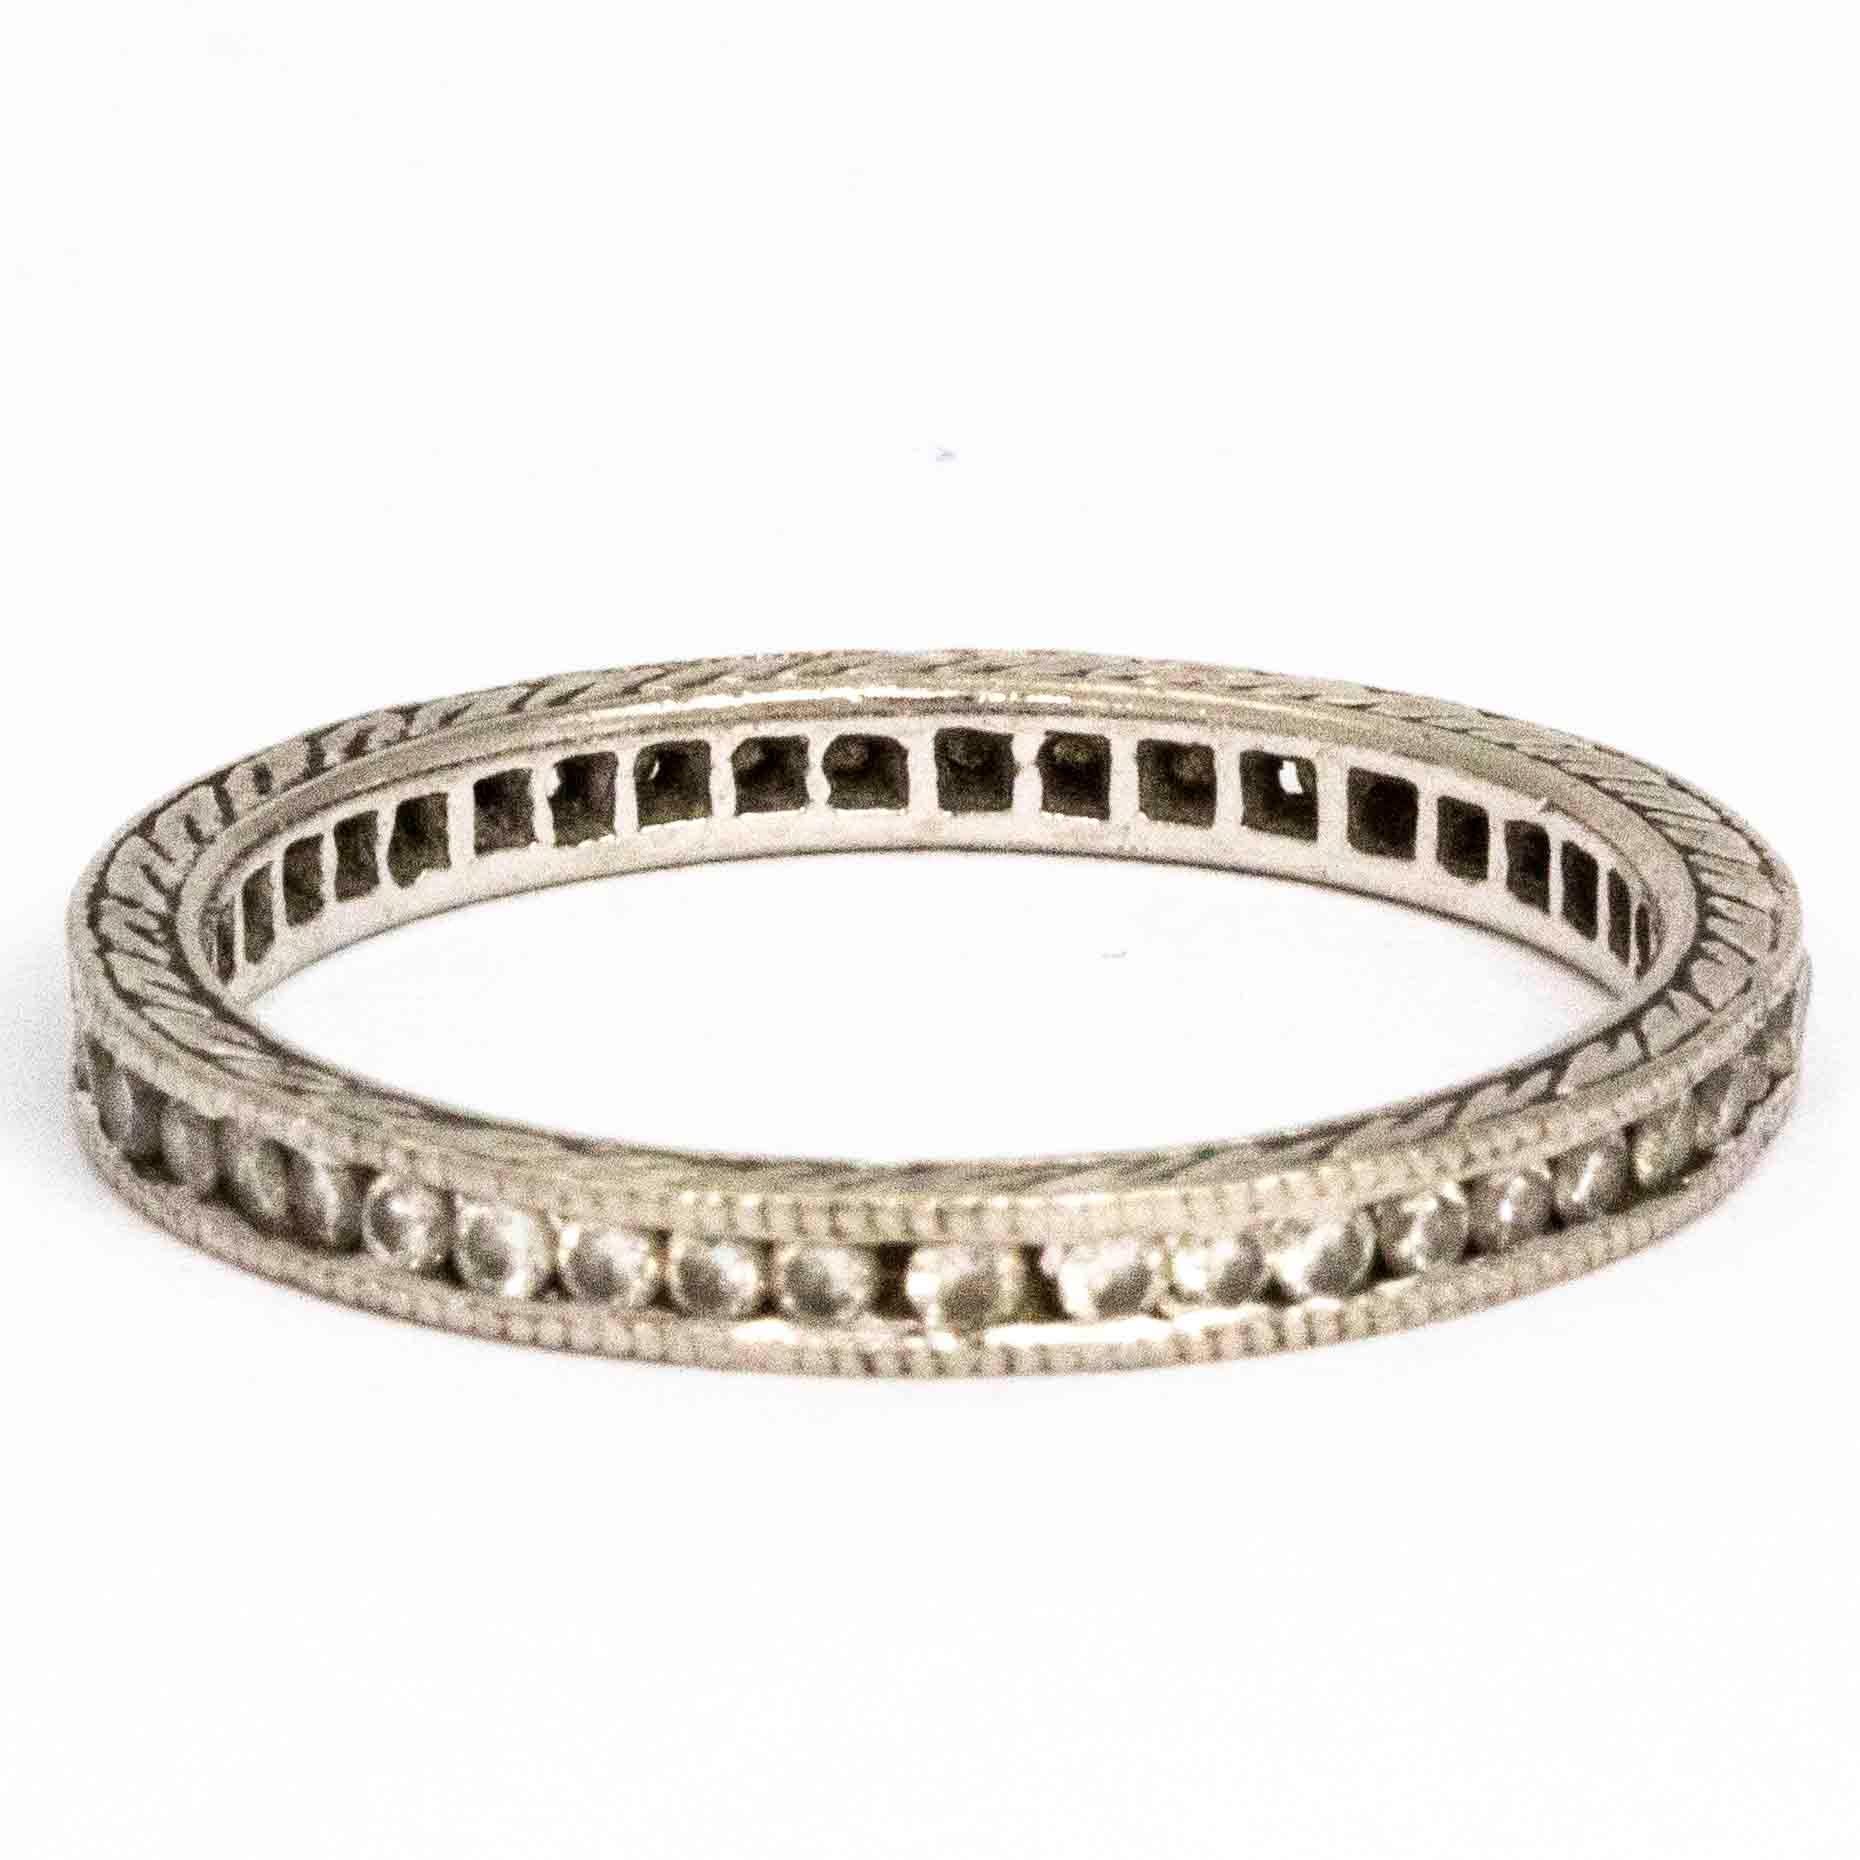 The delicate round diamonds that are encased n this ring measure approximately 1pt each and the band is modelled in platinum. The band itself has wonderful engraving all the way around. 

Ring Size: M or 6
Band Width: 2mm